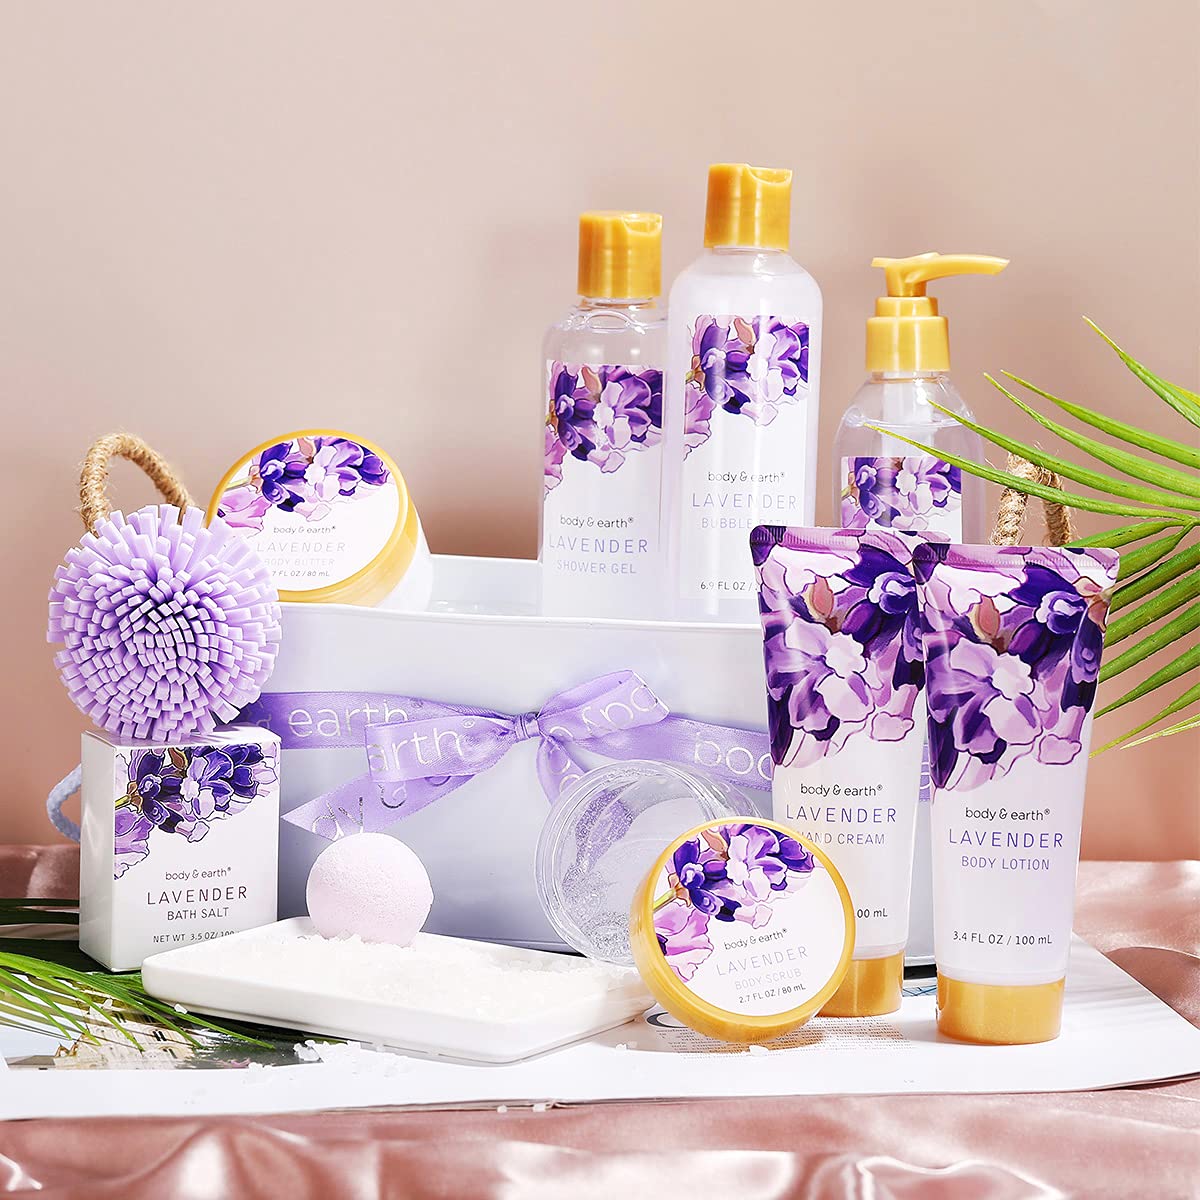 Spa Bath Gift Sets for Women, 11 Pcs Lavender Gift Baskets, Birthday Holiday Bath and Body Sets Beauty Gifts - image 3 of 10